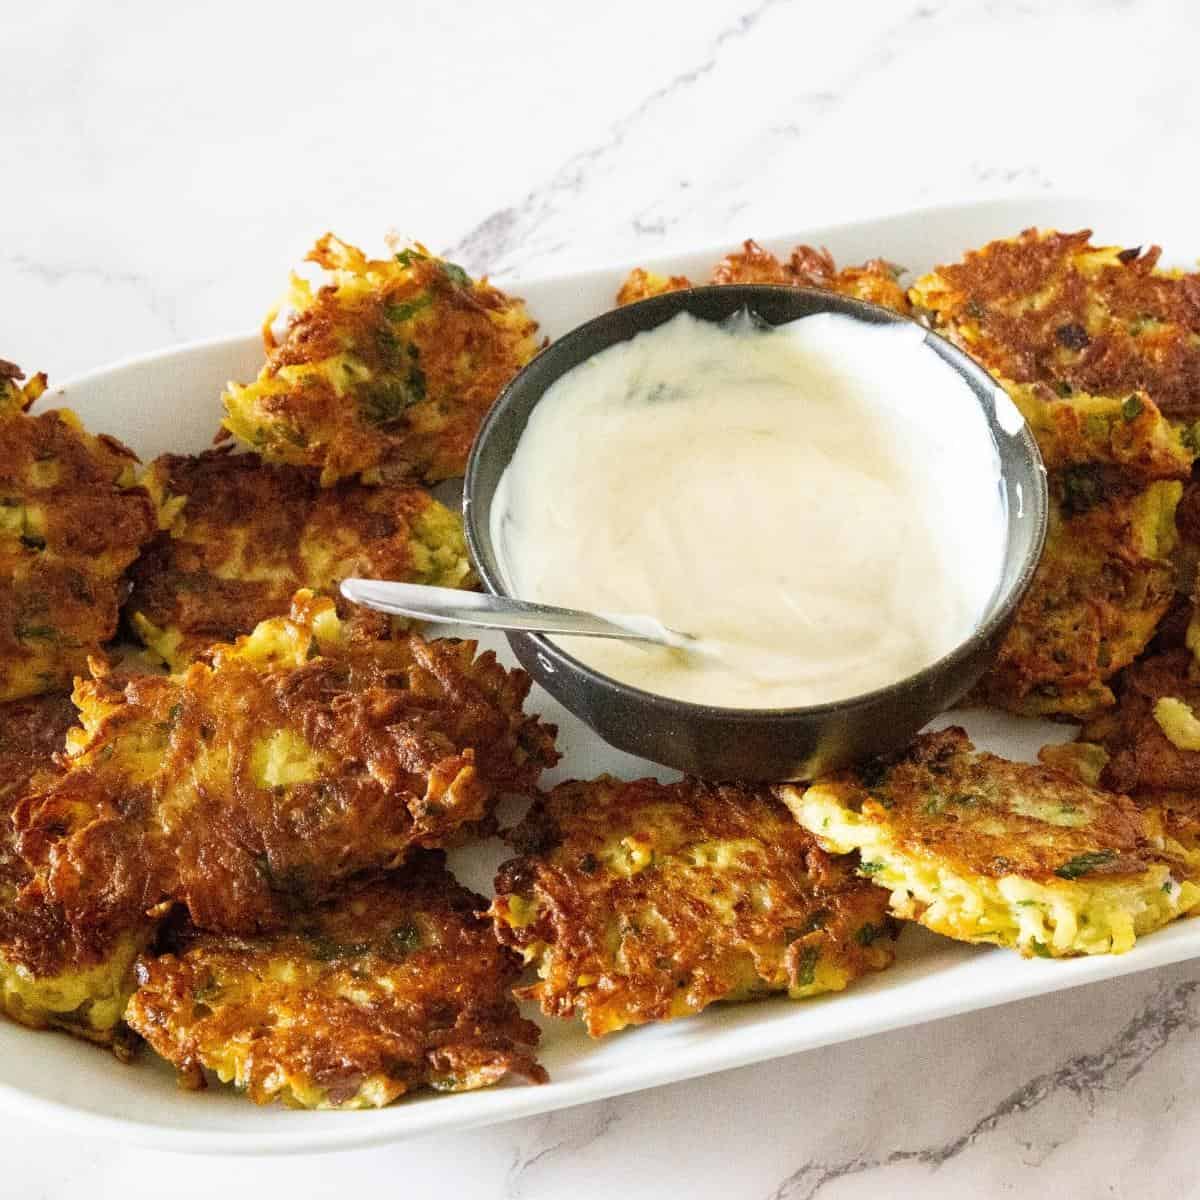 A platter with latkes and dip.